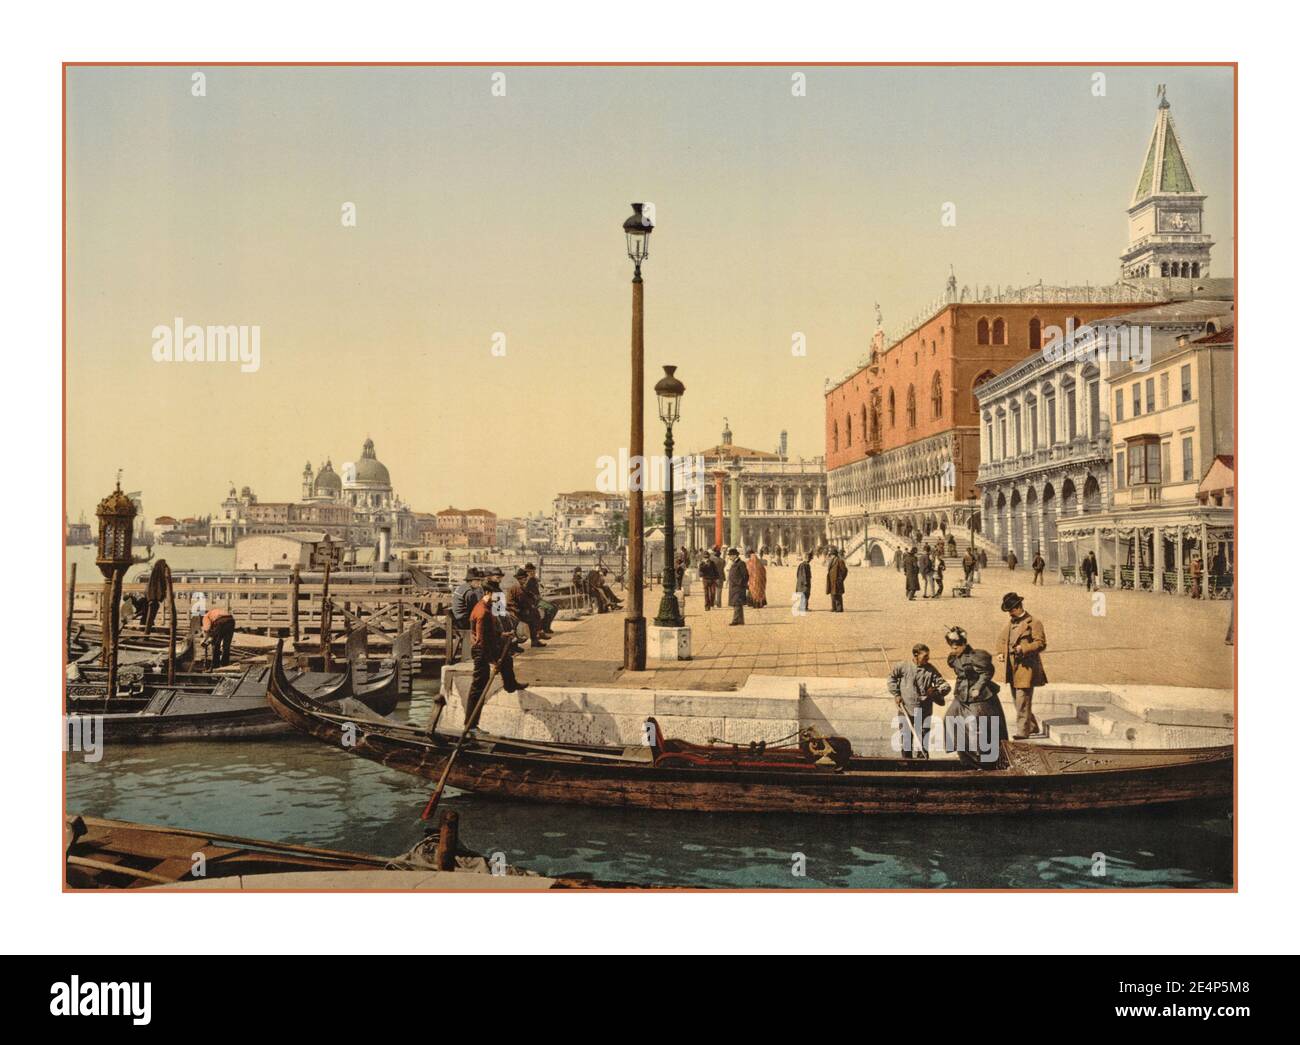 VENICE PHOTOCHROM Vintage 1900’s Old retro Venice front of  Doges' Palace, Santa Maria della Salute Church of Salute Old Historic Venice, Italy- Photochrom 1900 with Gondola and Gondolier in foreground Venice Italy Stock Photo